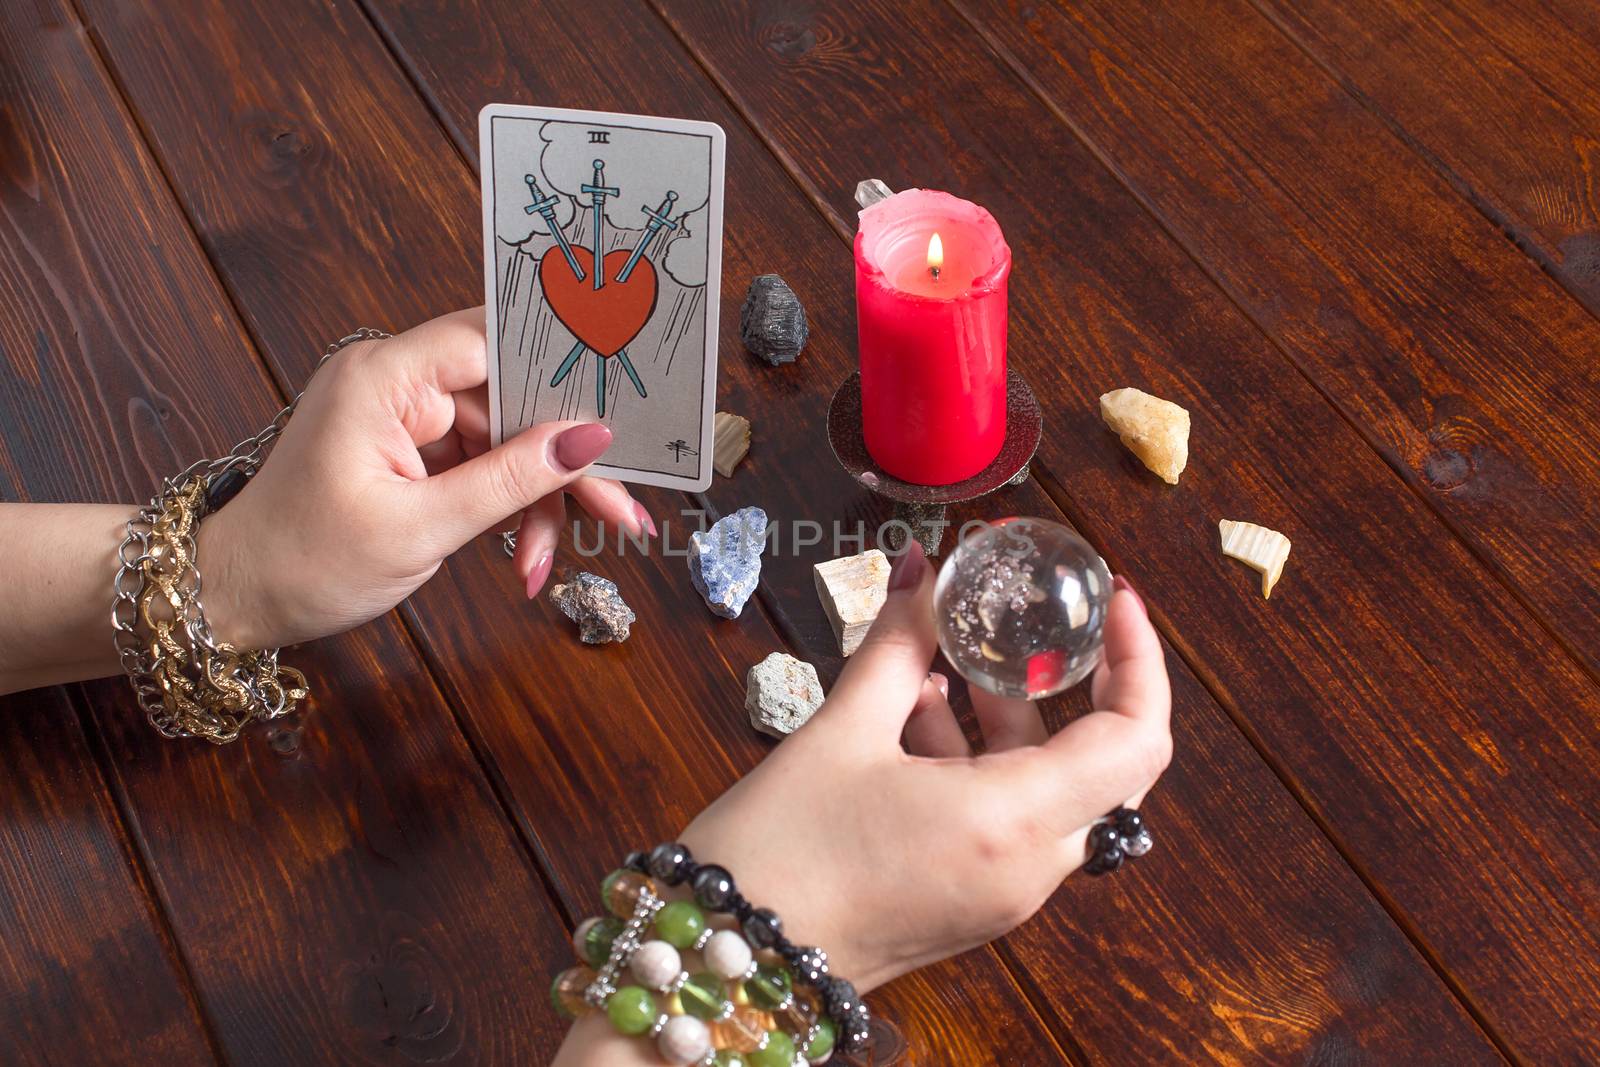 Bangkok, Thailand, March.15.20.A fortune teller holds a magic ball and a Tarot card with a heart.The Gypsy lays out Tarot cards and guesses for the future.Magical sessions with the cards.Clairvoyance